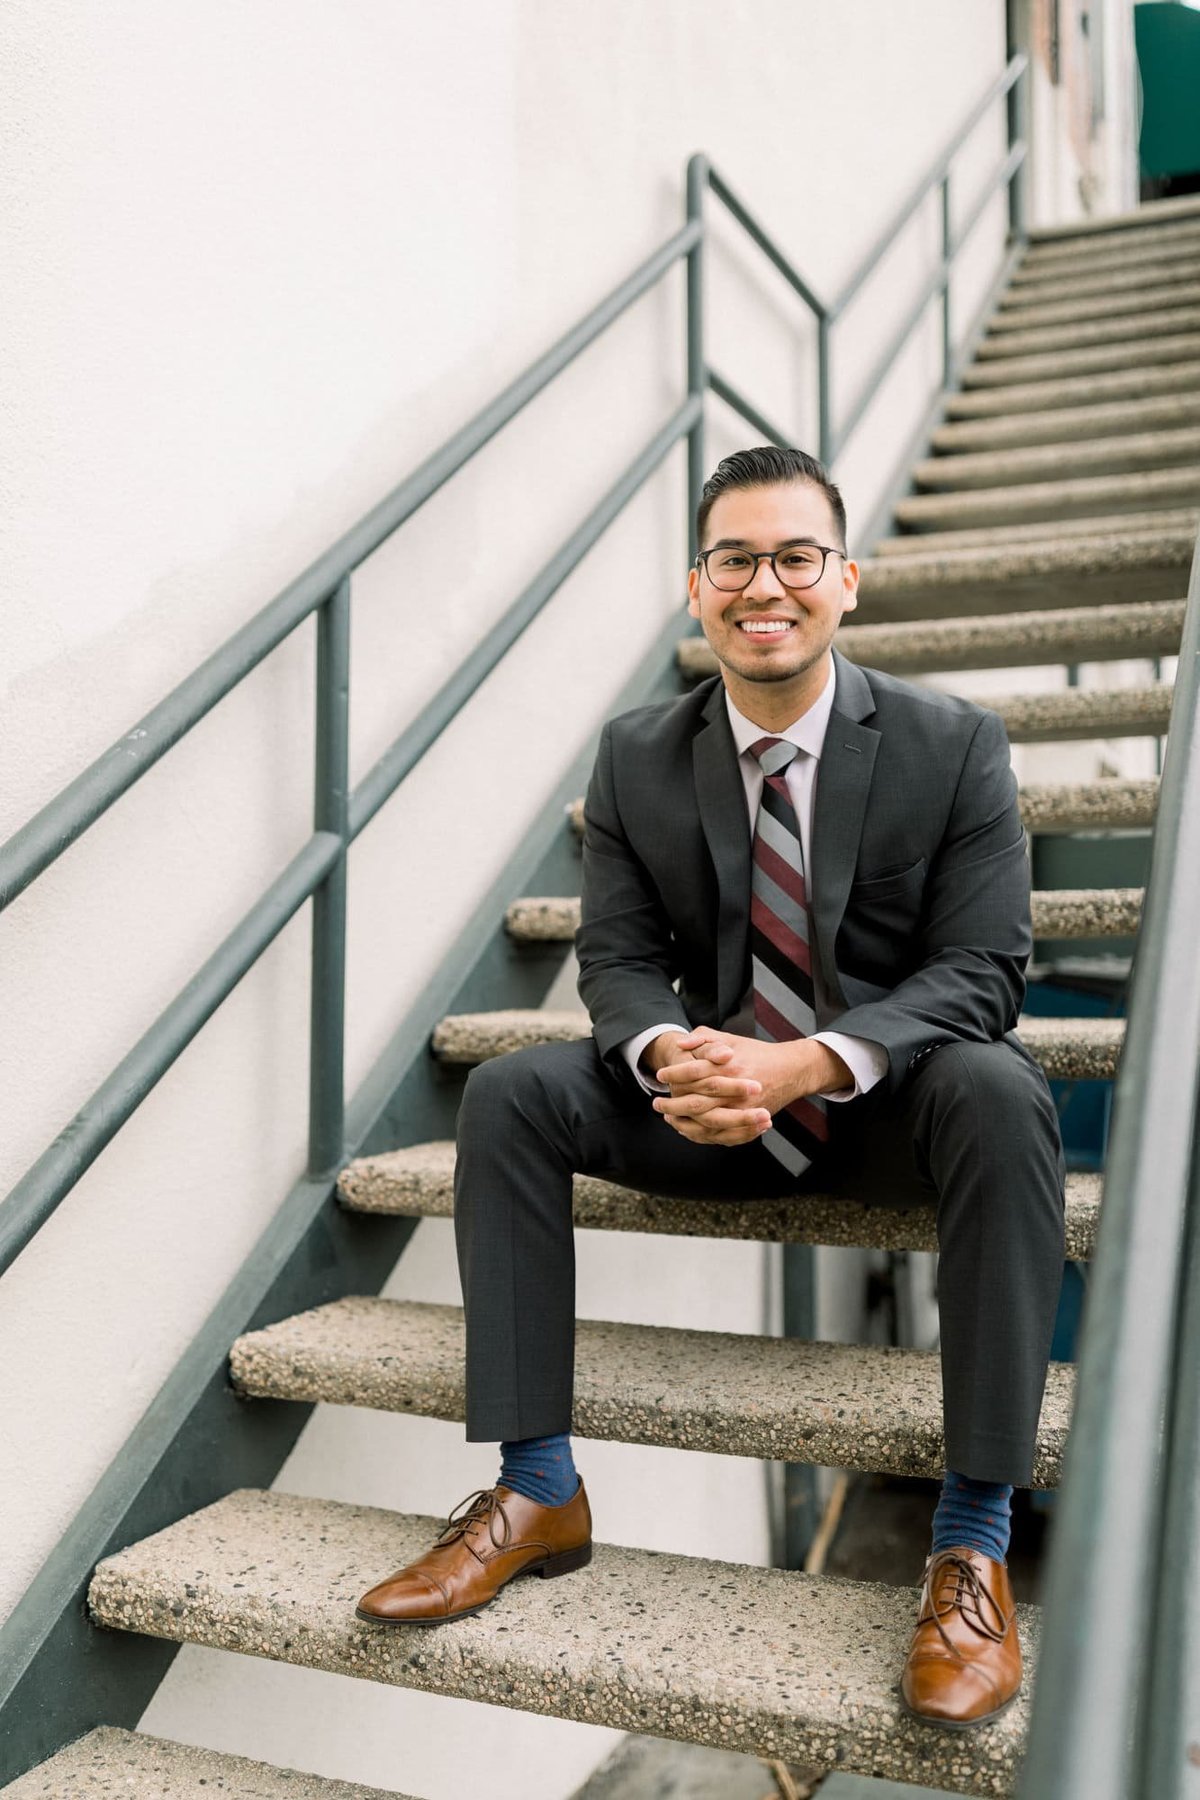 College senior poses in his suit while sitting on outdoor staircase